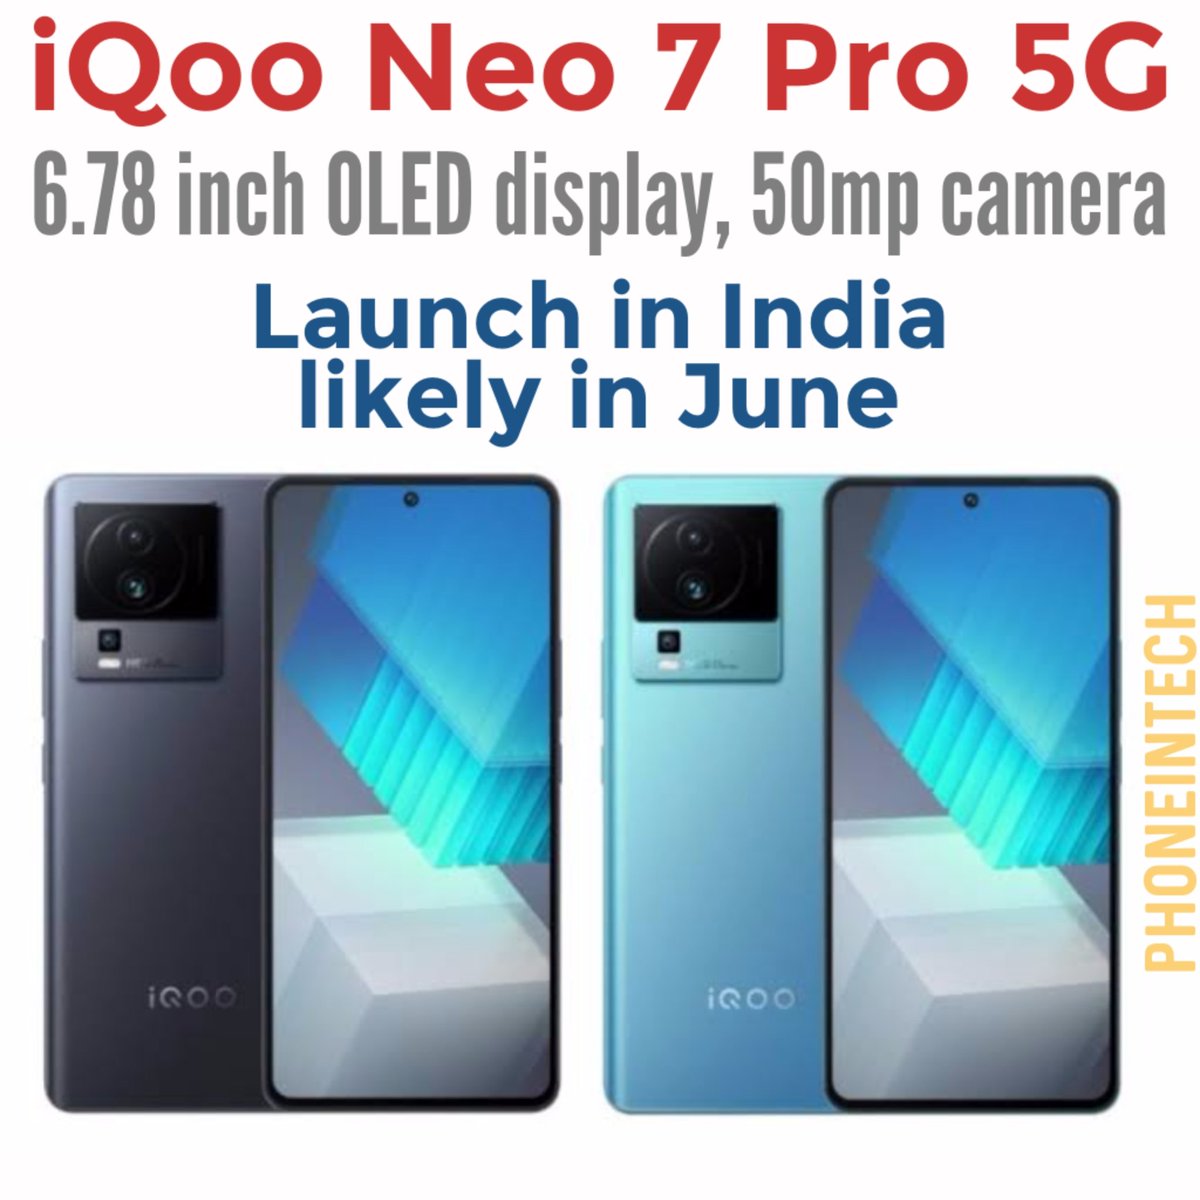 iQoo Neo 7 Pro 5G likely to be launched on June 20 in India. It features a 50mp primary camera sensor with a 6.78 inch 1.5K OLED display. It also offers 120W fast charging and runs on Snapdragon 8+ Gen 1 SoC. 

#iqooneo75g #iqoo #iqoosmartphones #technews #technewsindia